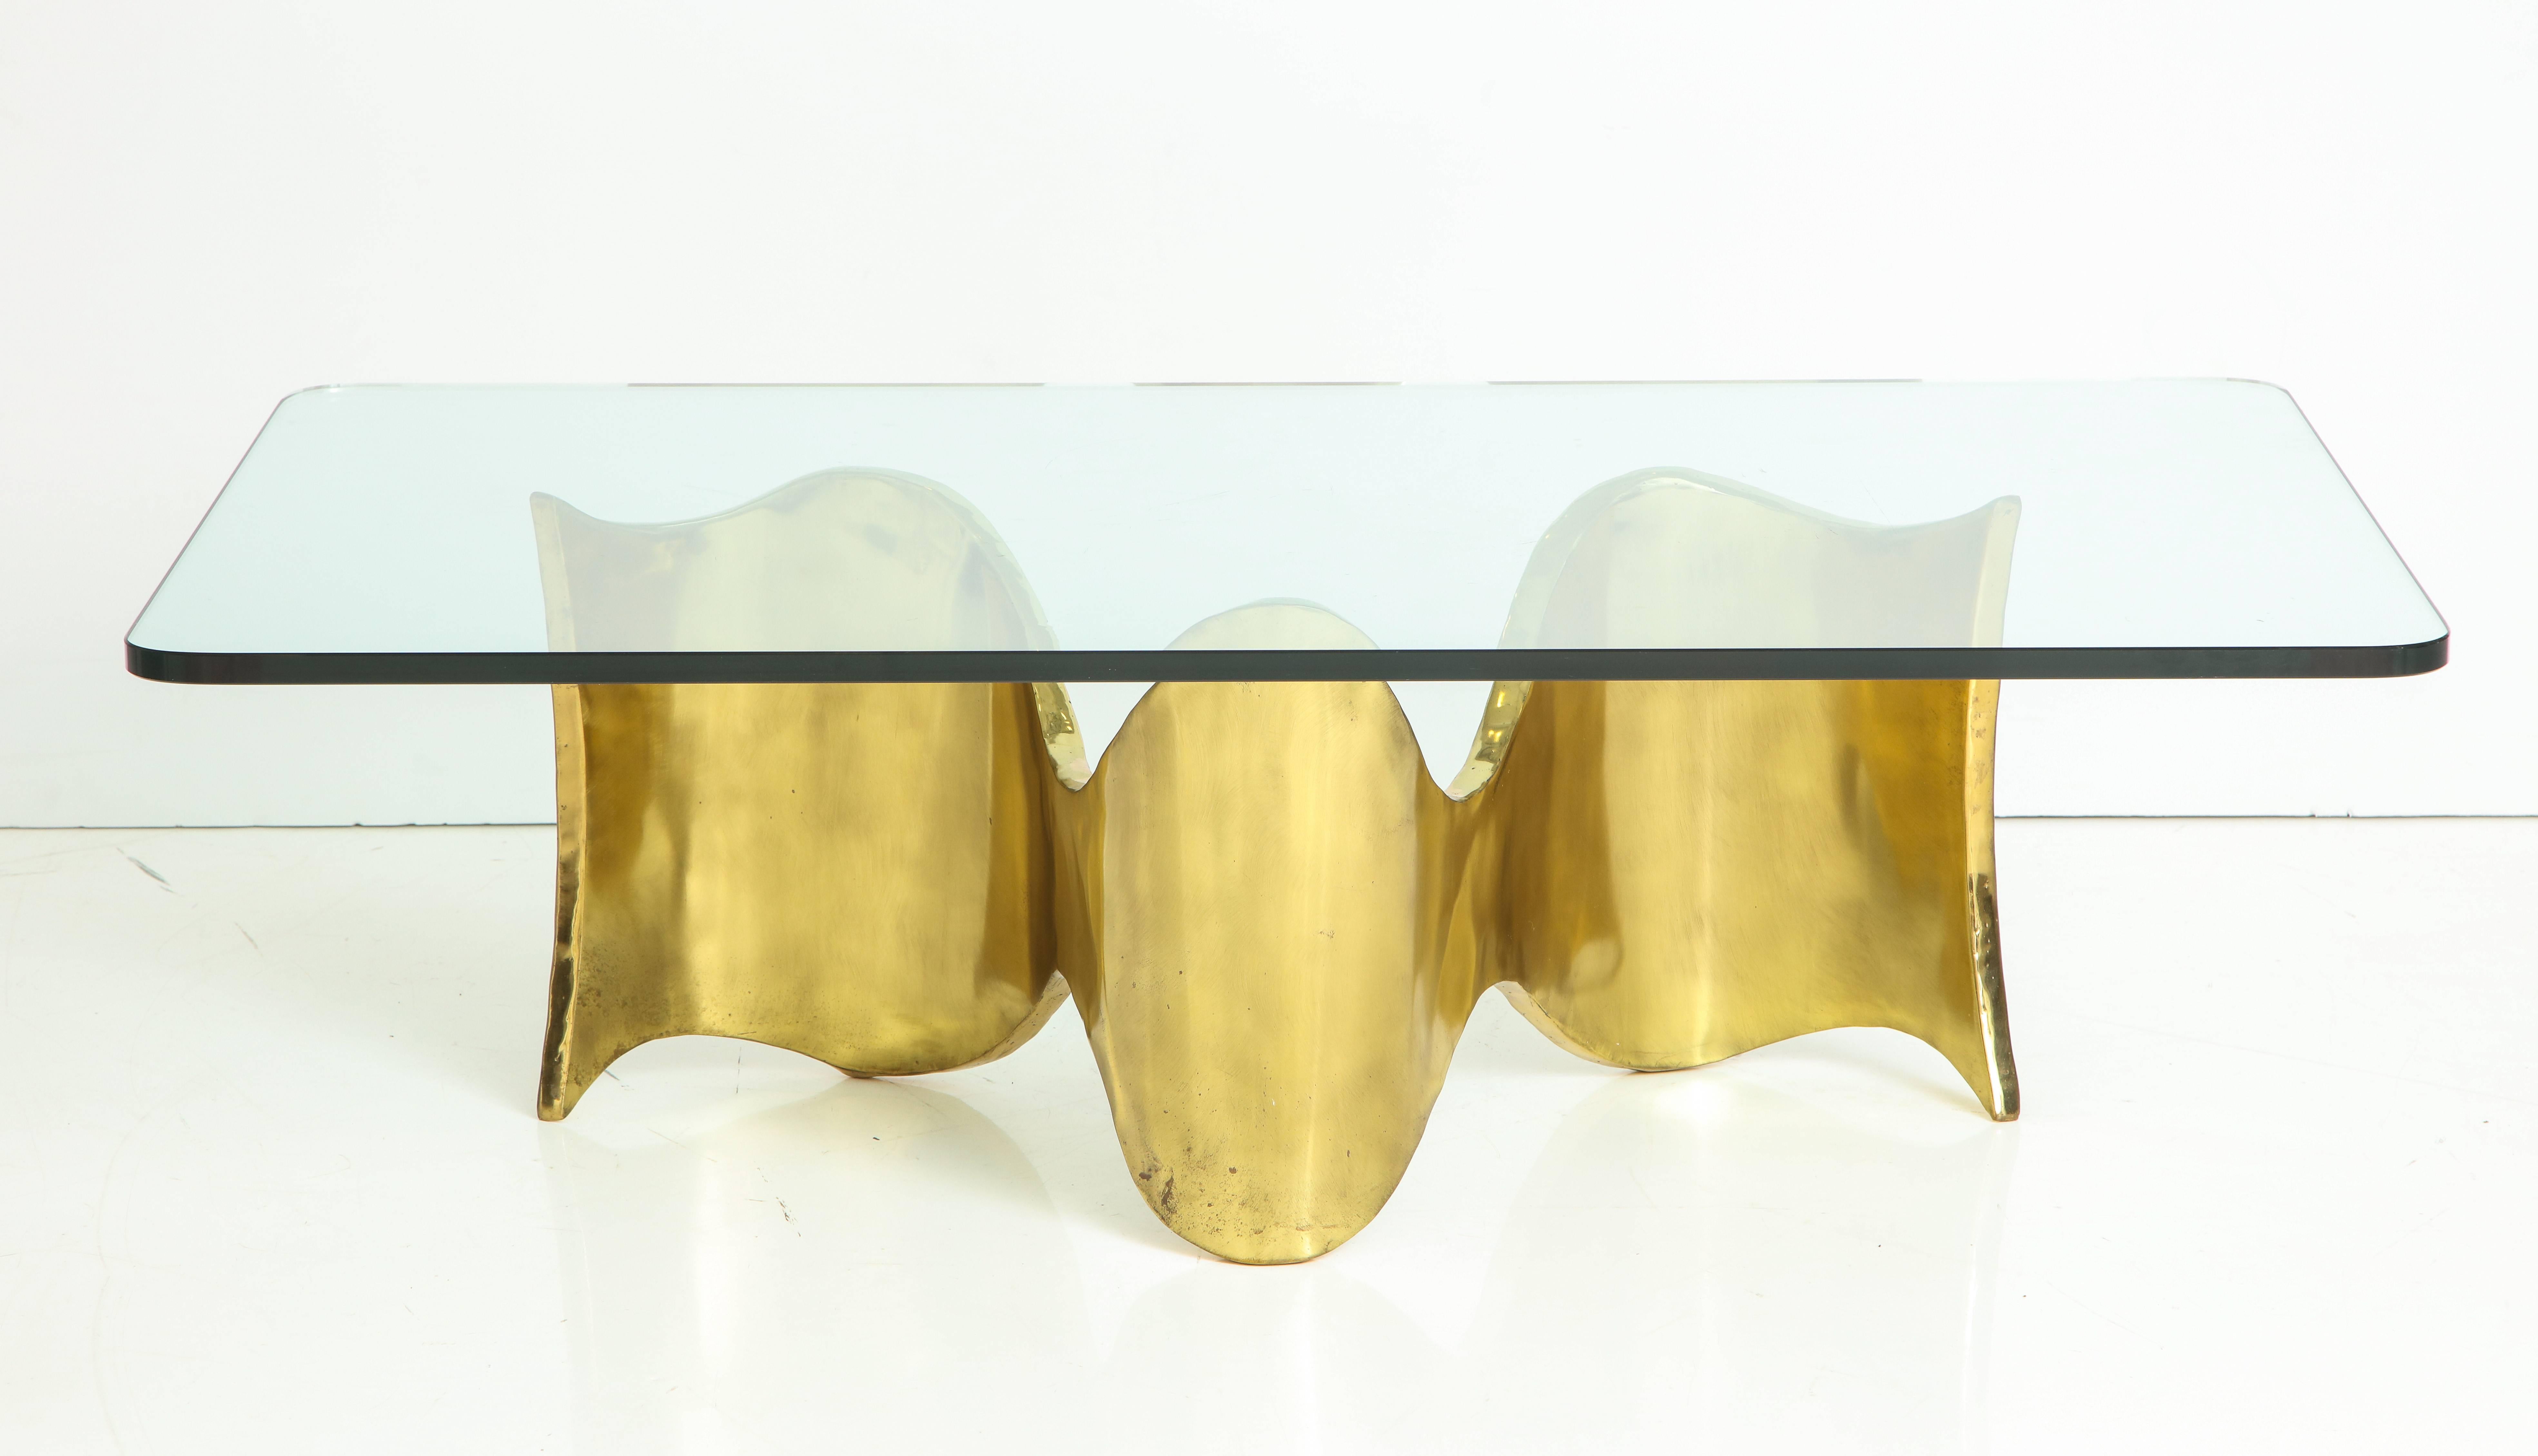 Impactful, sinuous ribbon-shaped cocktail table in brass finish by New York City artist Silas Seandel. Made circa 1980 for a Long Island, New York home that included
four Seandel works--a demilune console, hanging console, and mirror in addition to